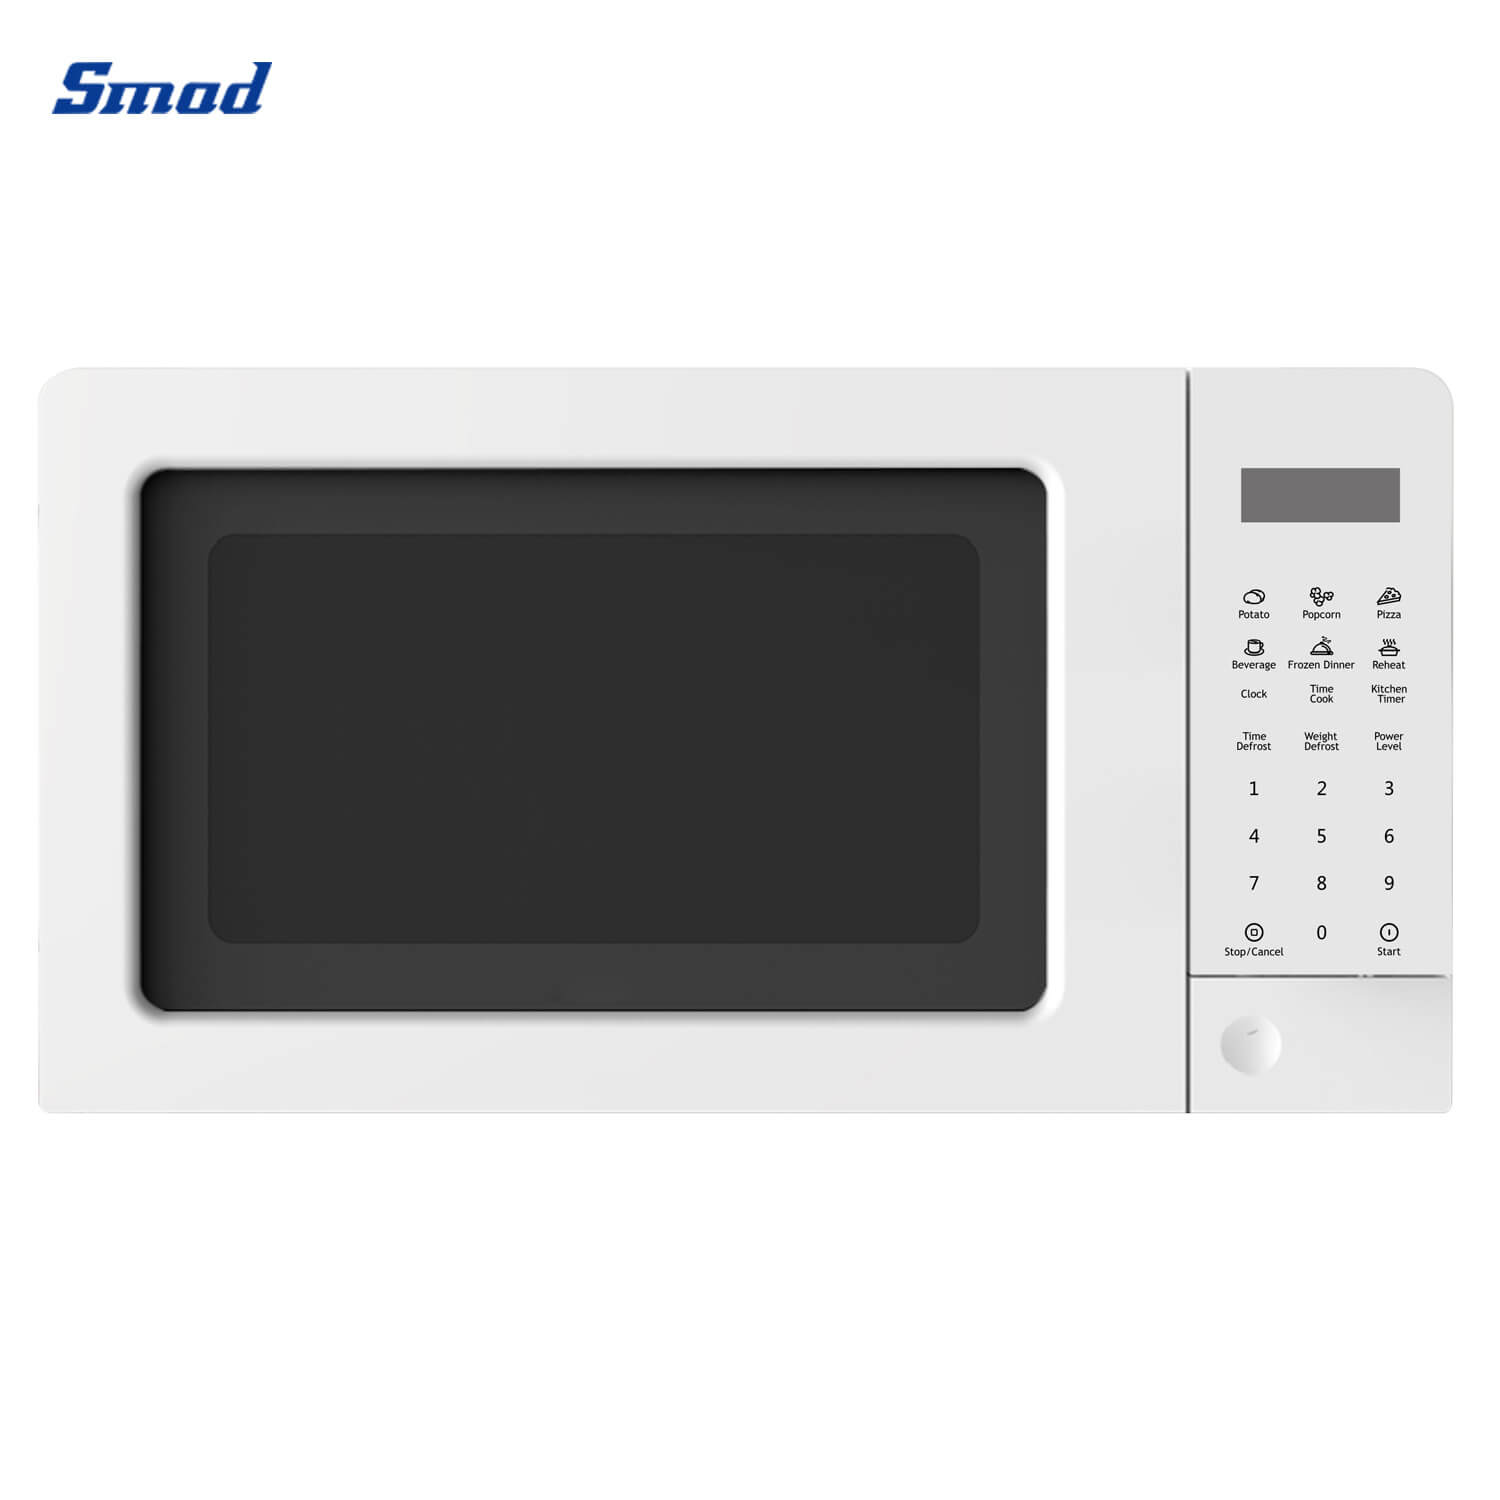 
Smad Digital Microwave Oven with LED Display